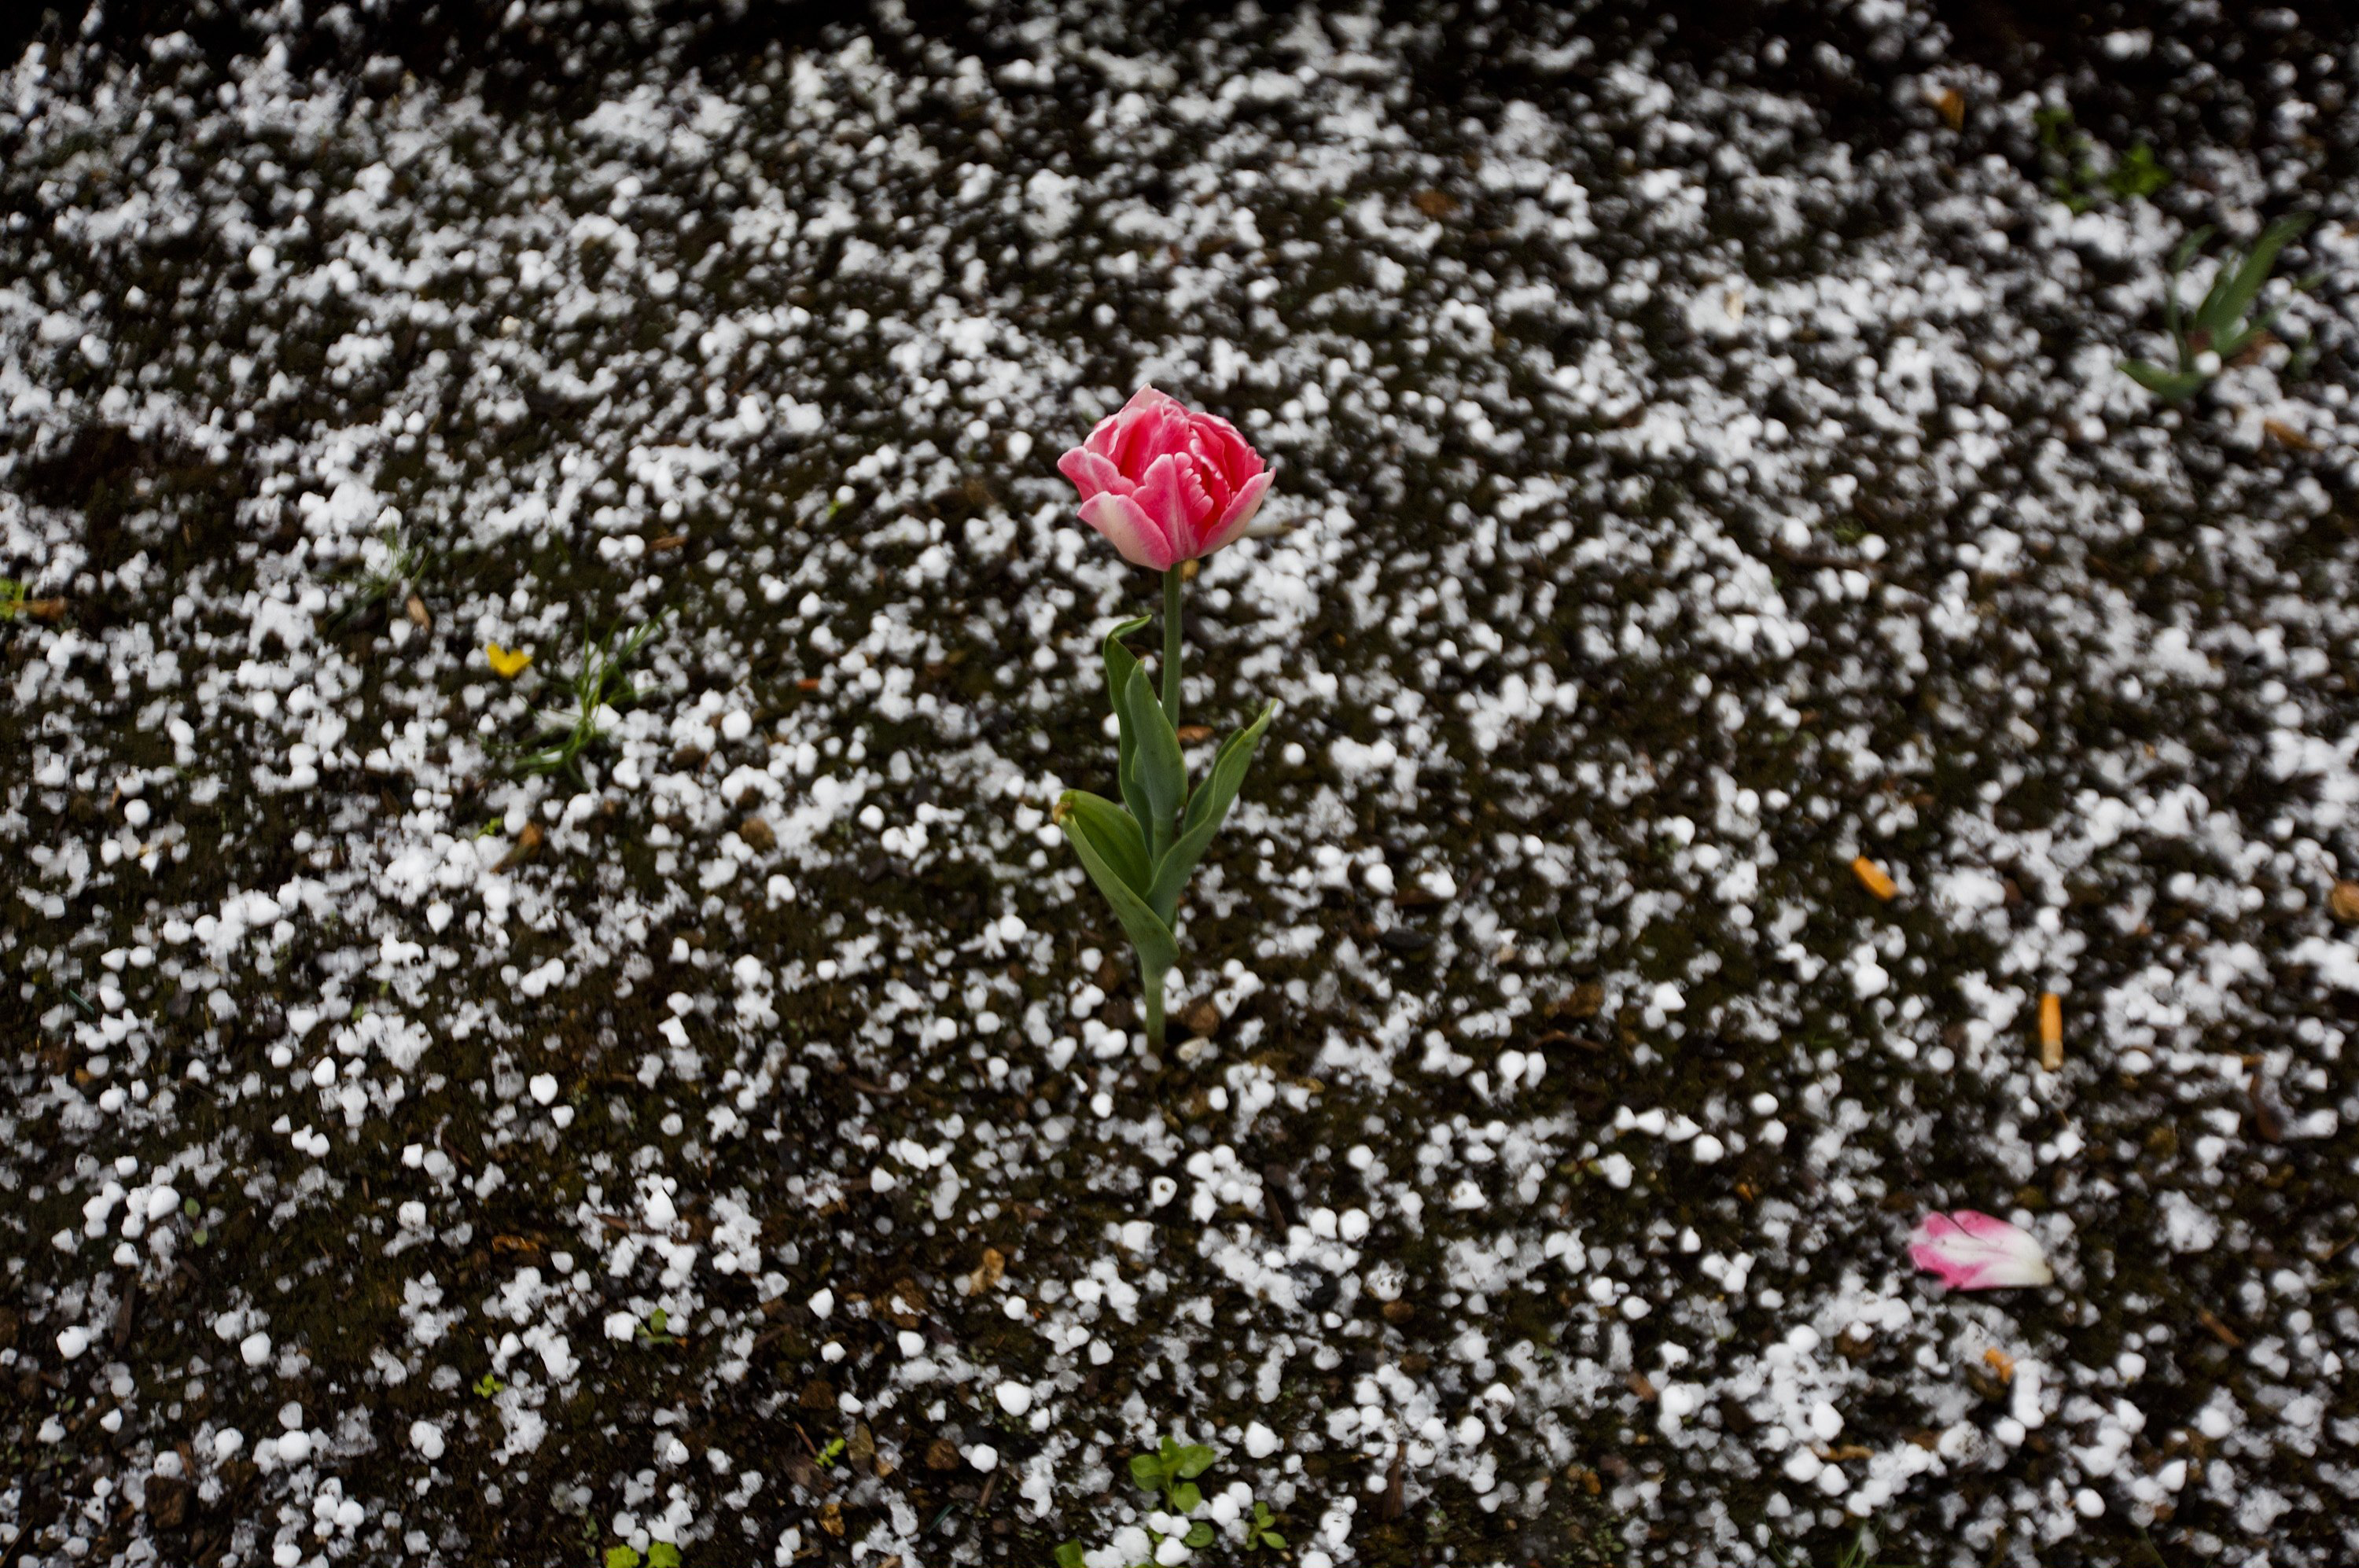 Apr. 14, 2014. A blooming tulip is surrounded by hail after a hail shower at the Old Town Square in Prague, Czech Republic.